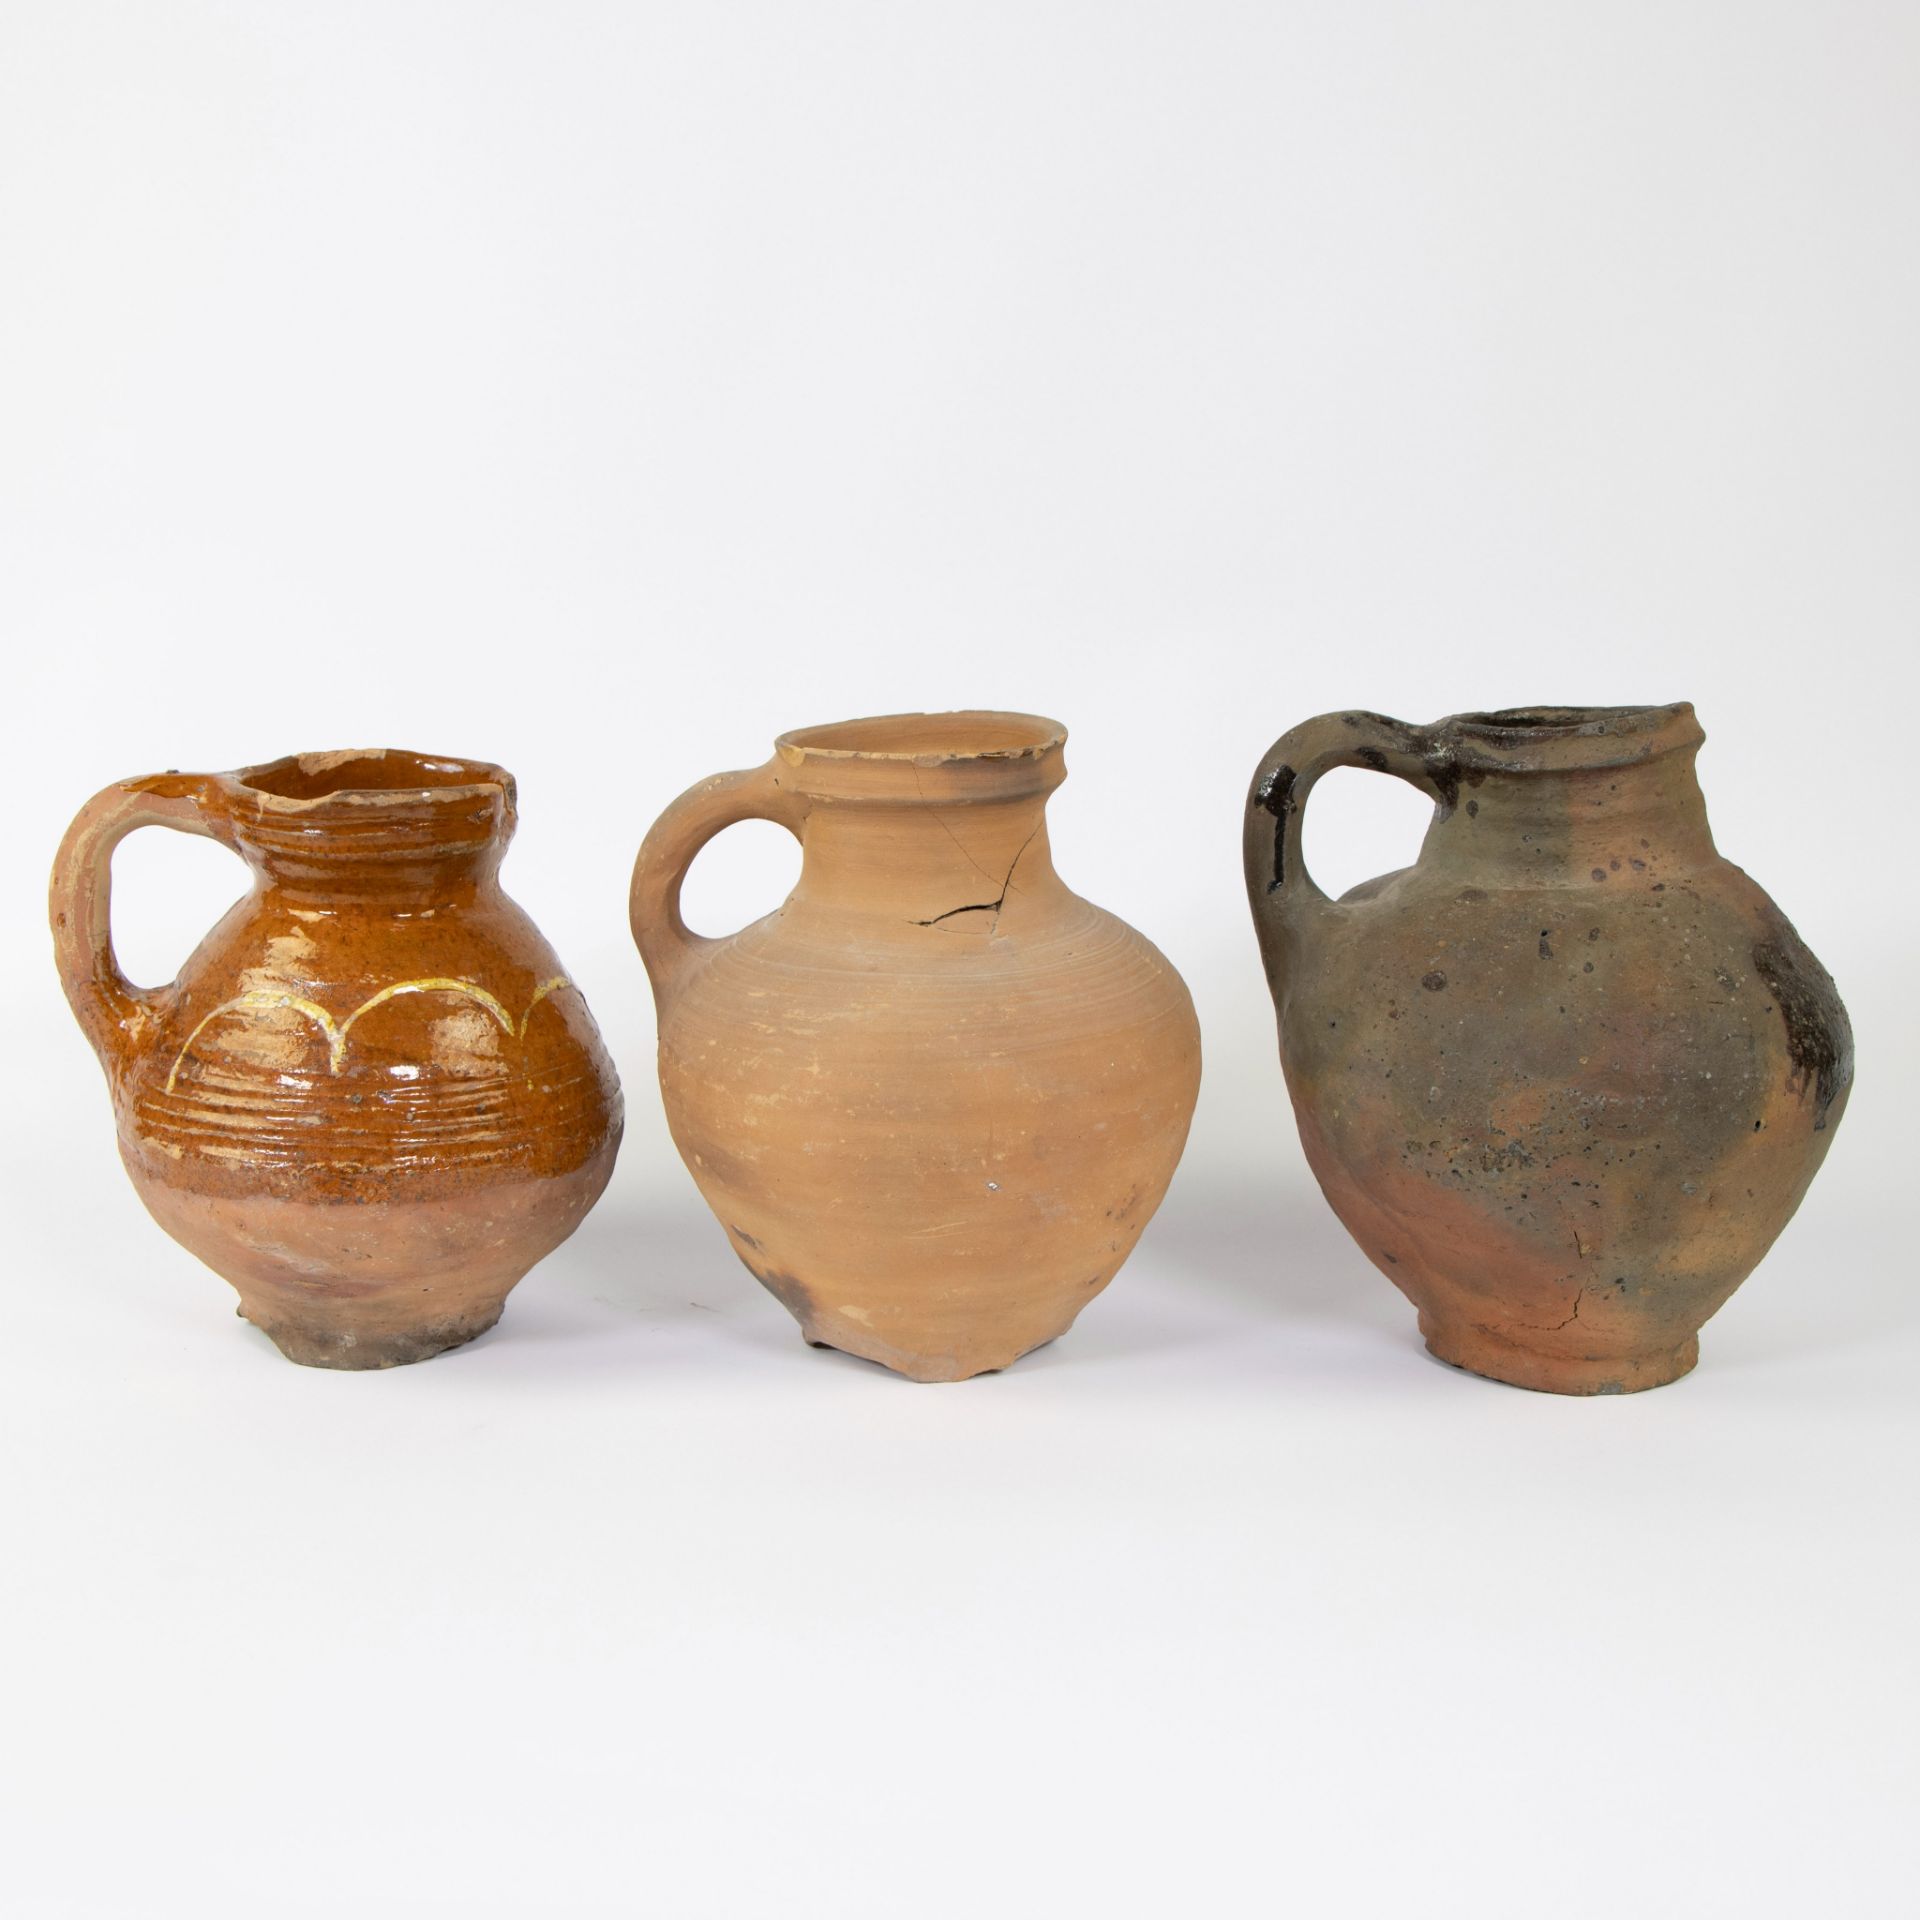 Collection of archaeological pottery, 3 jugs 14th/15th century - Image 3 of 5